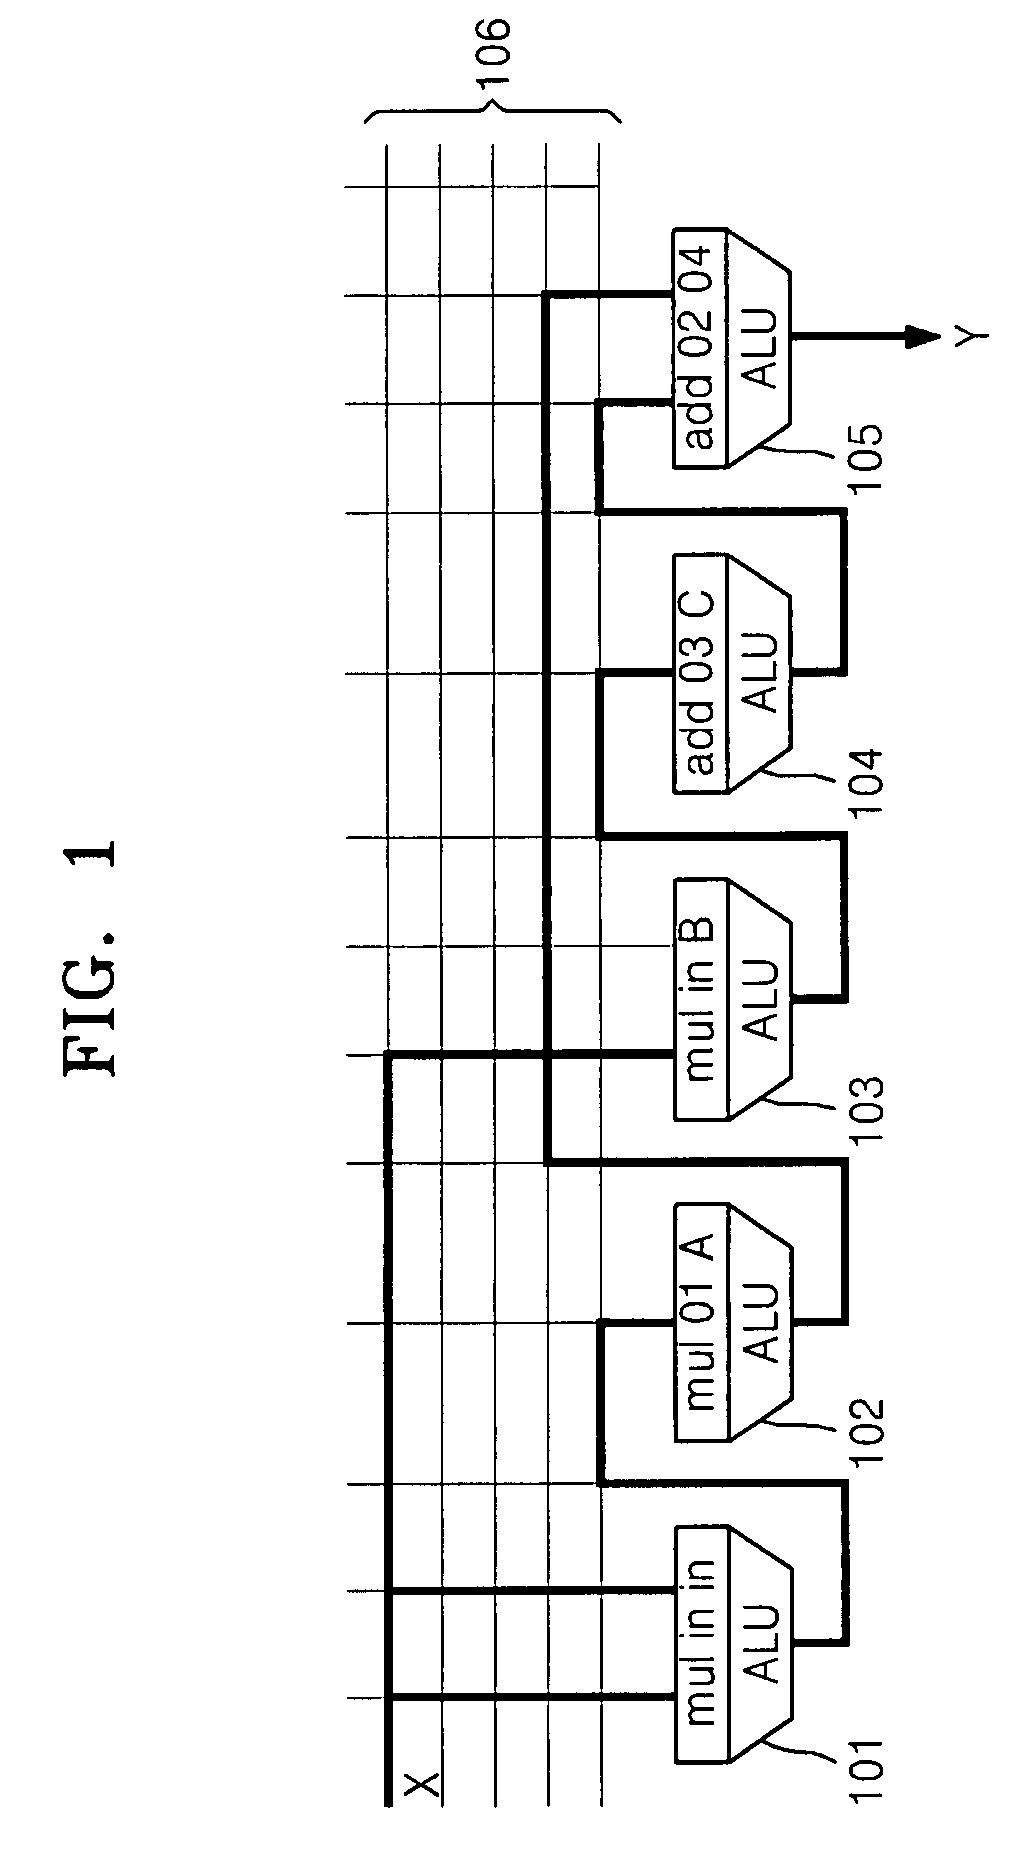 Multitasking method and apparatus for reconfigurable array